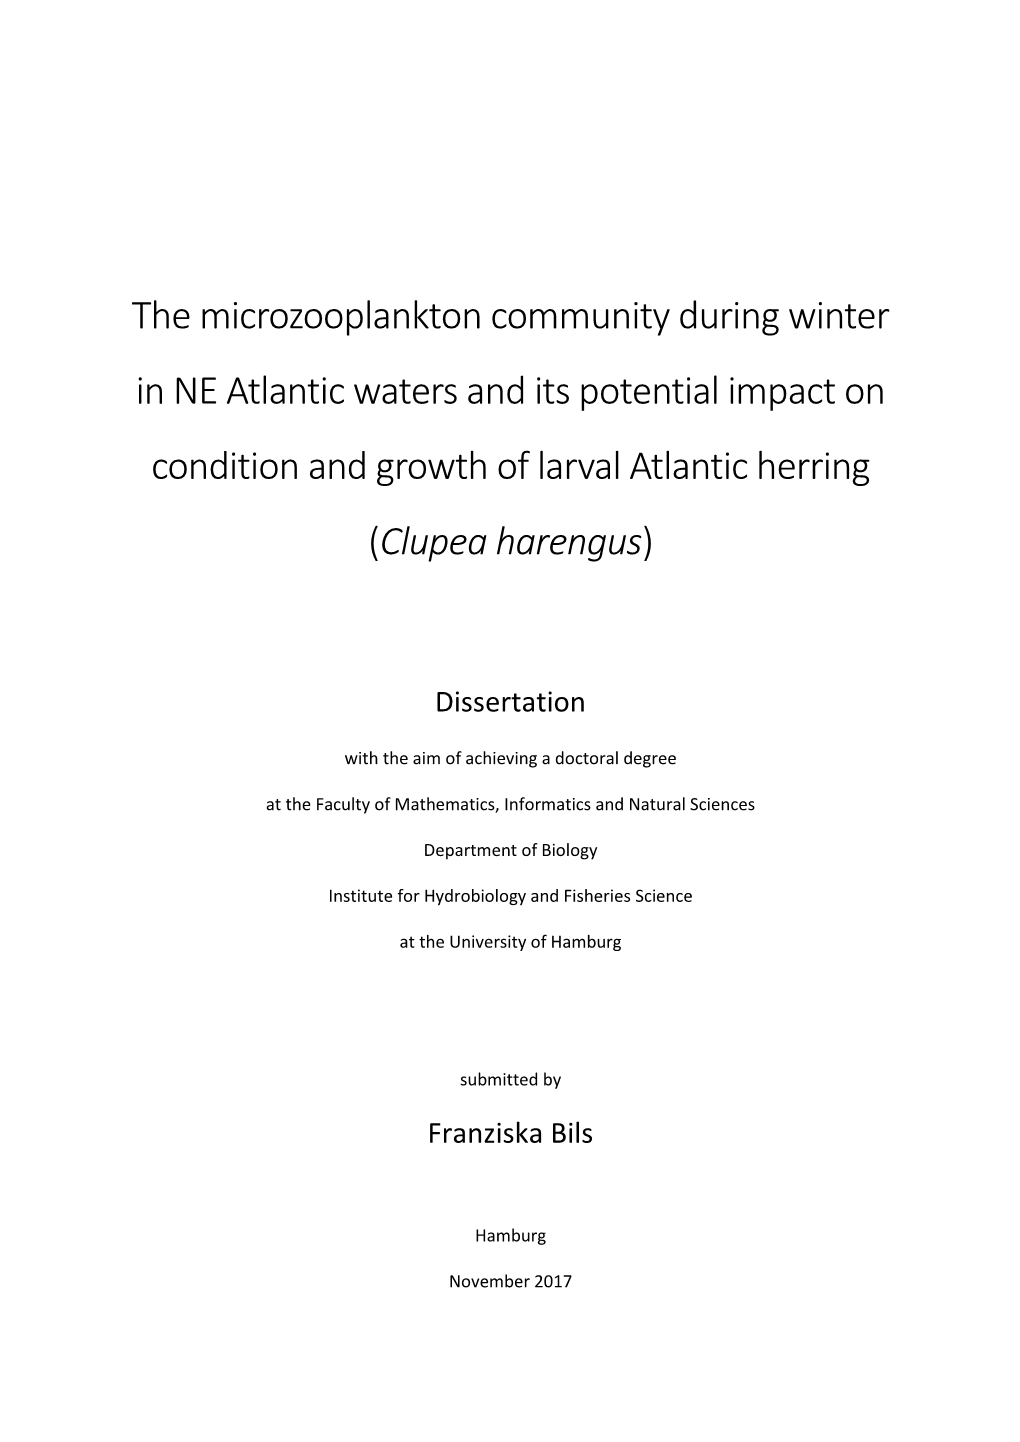 The Microzooplankton Community During Winter in NE Atlantic Waters and Its Potential Impact on Condition and Growth of Larval Atlantic Herring (Clupea Harengus)